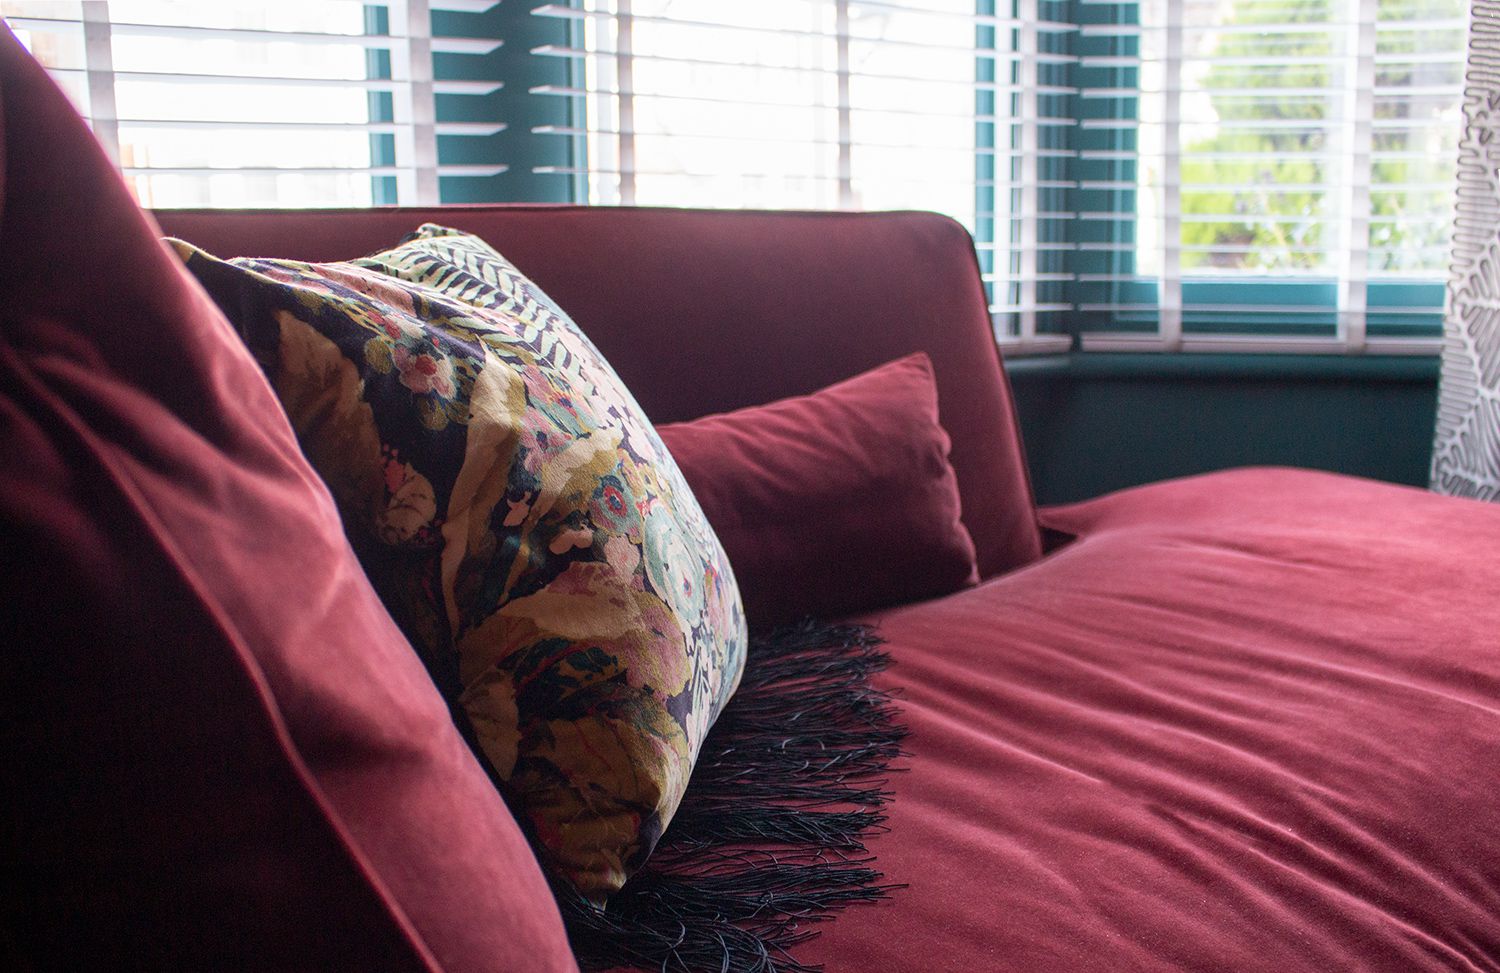 A close up of the brightly coloured and patterned cushion on the claret coloured velvet chaise.